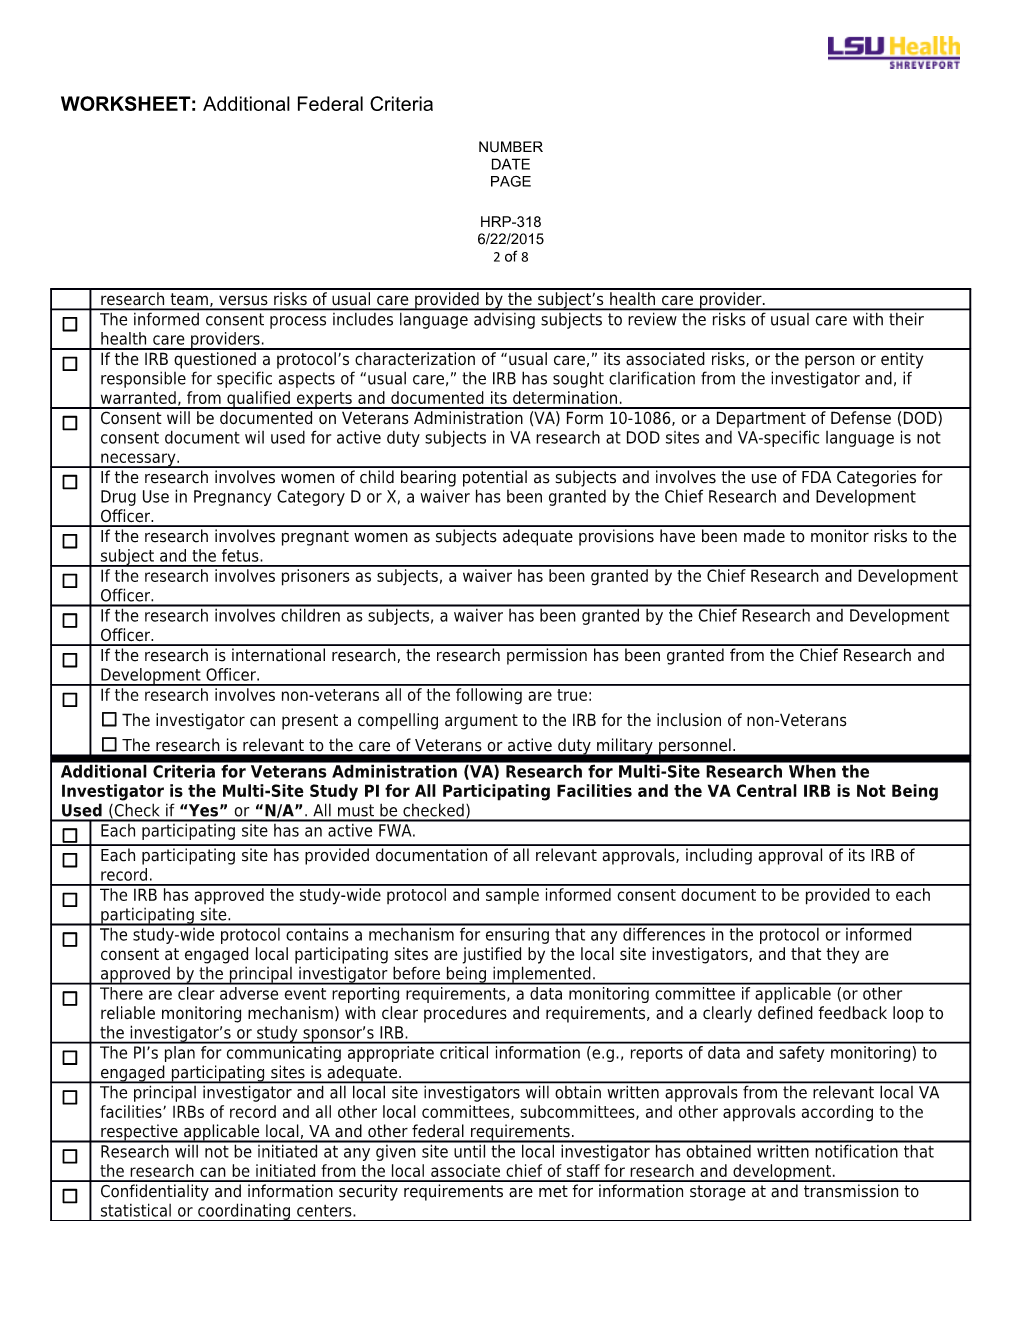 WORKSHEET: Criteria for Approval and Additional Considerations s1